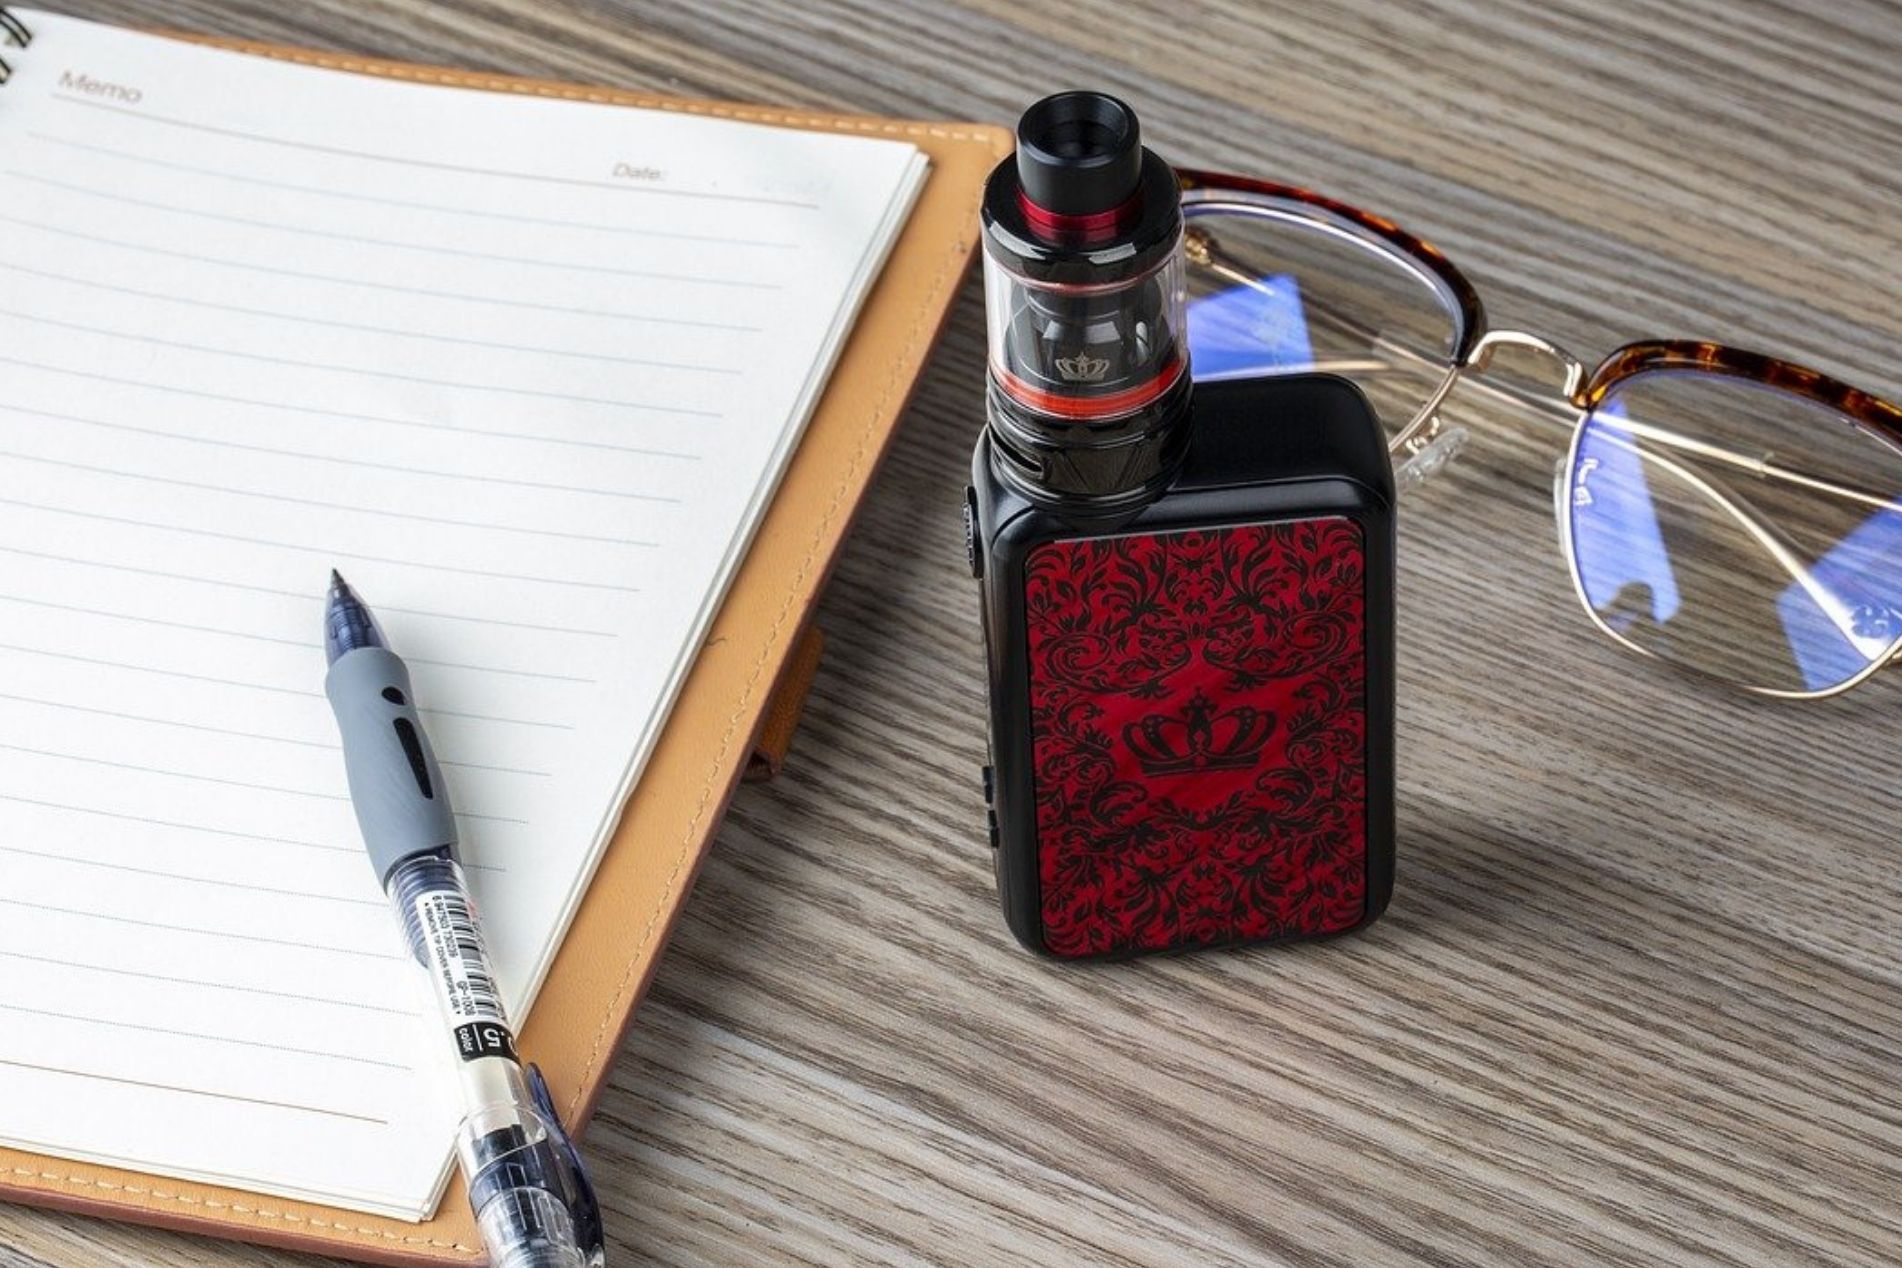 A red and black vape sits ona. wooden desk next to a notepad and a pair of glasses